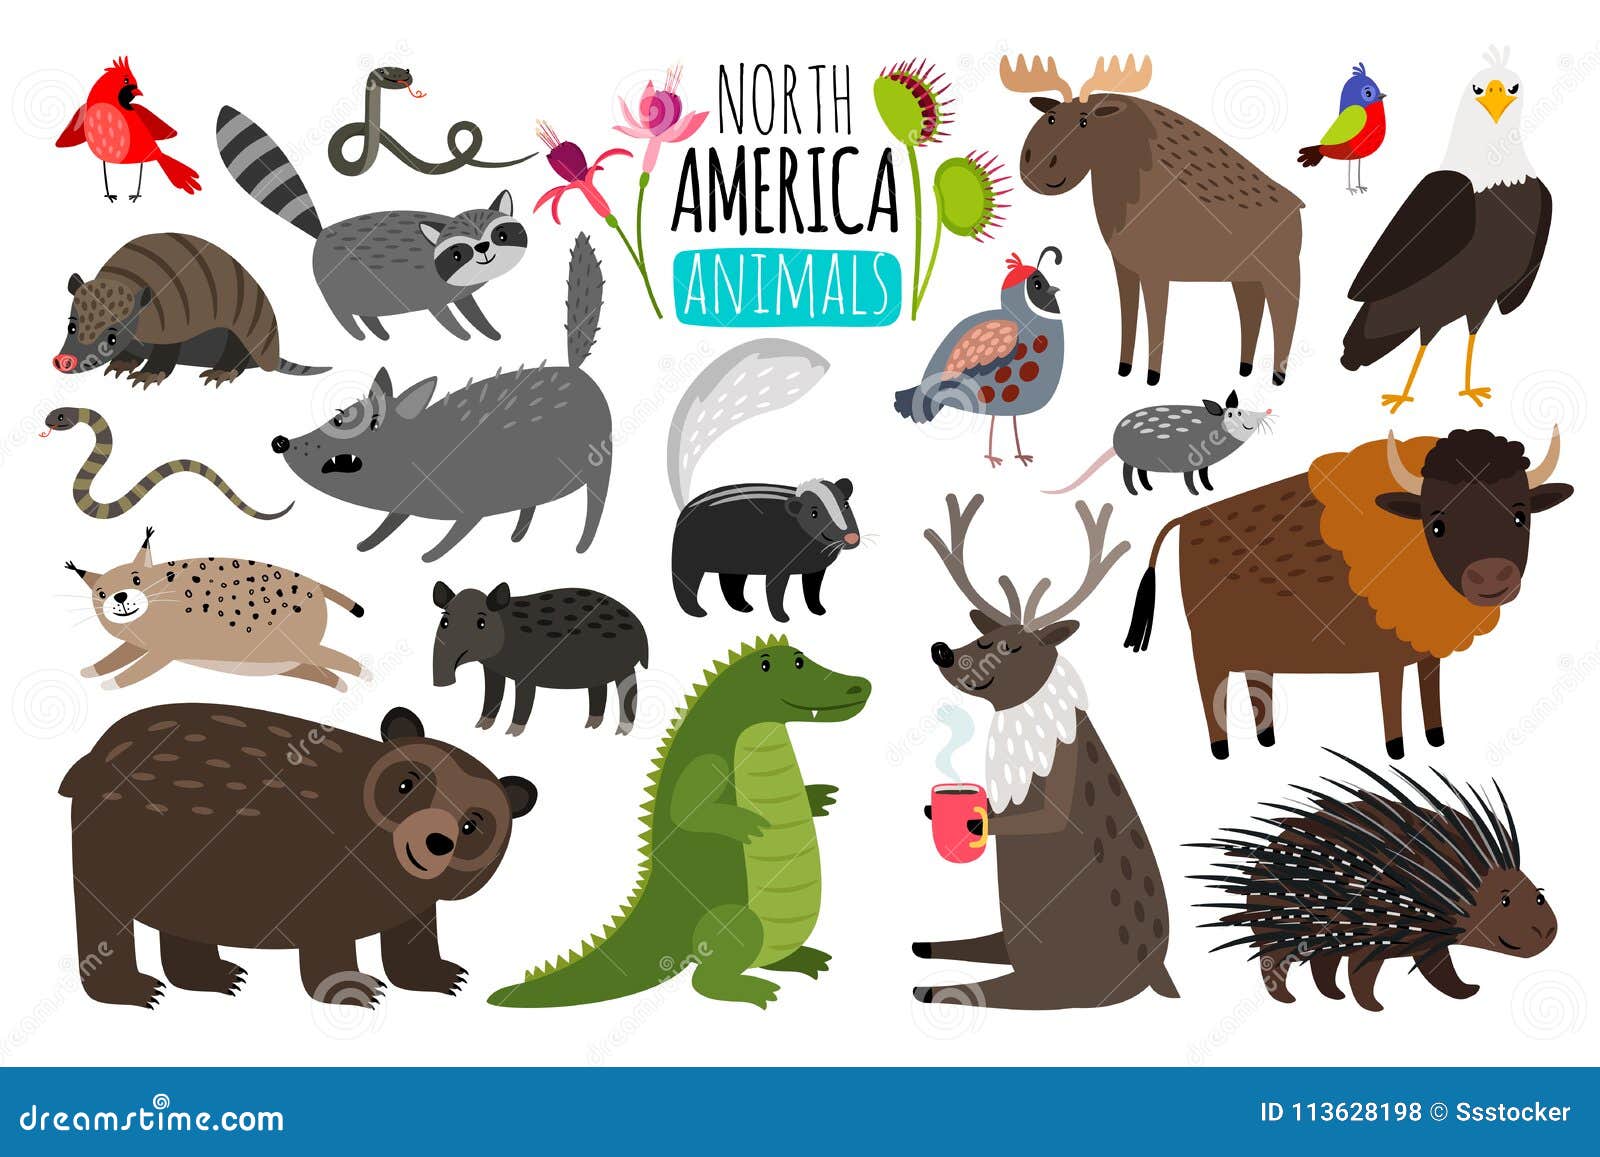 North American Animals. Animal Graphics of North America, American Bison  and Skunk, Cute Moose and Lynx Stock Vector - Illustration of biology,  animal: 113628198